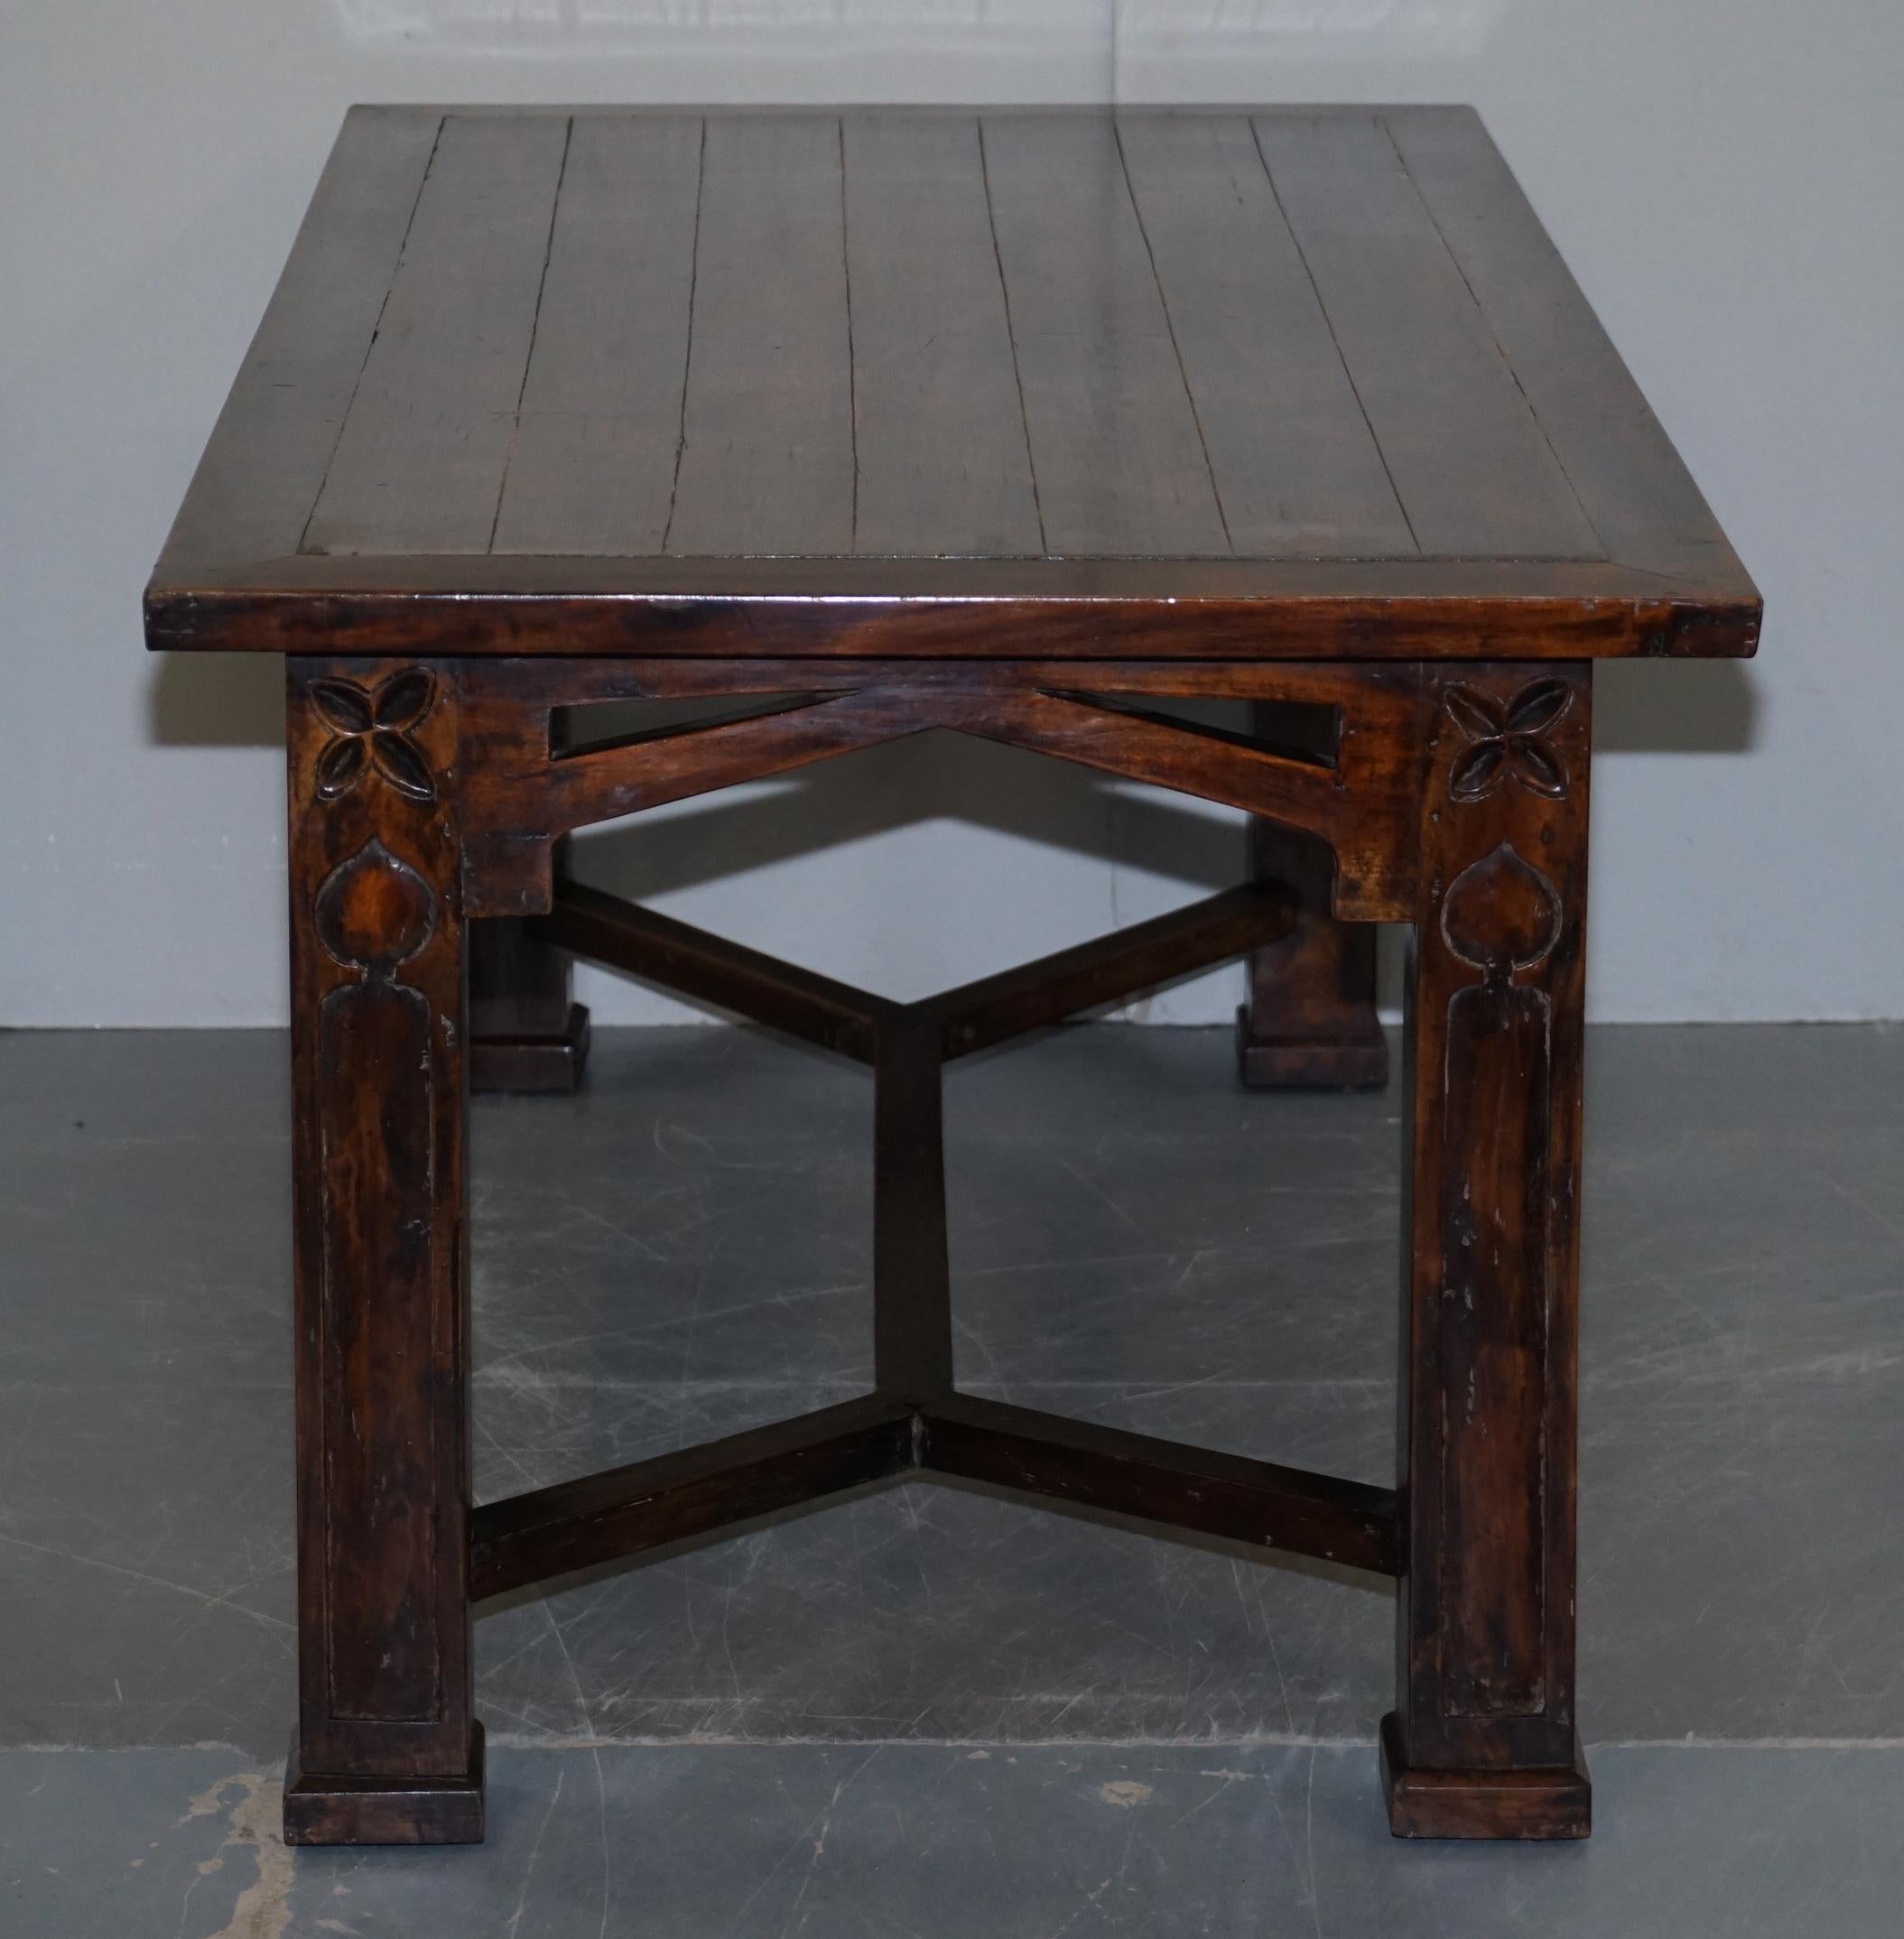 Vintage Art Nouveau Refectory Hayrake Dining Table with Beautiful Carved Legs For Sale 7